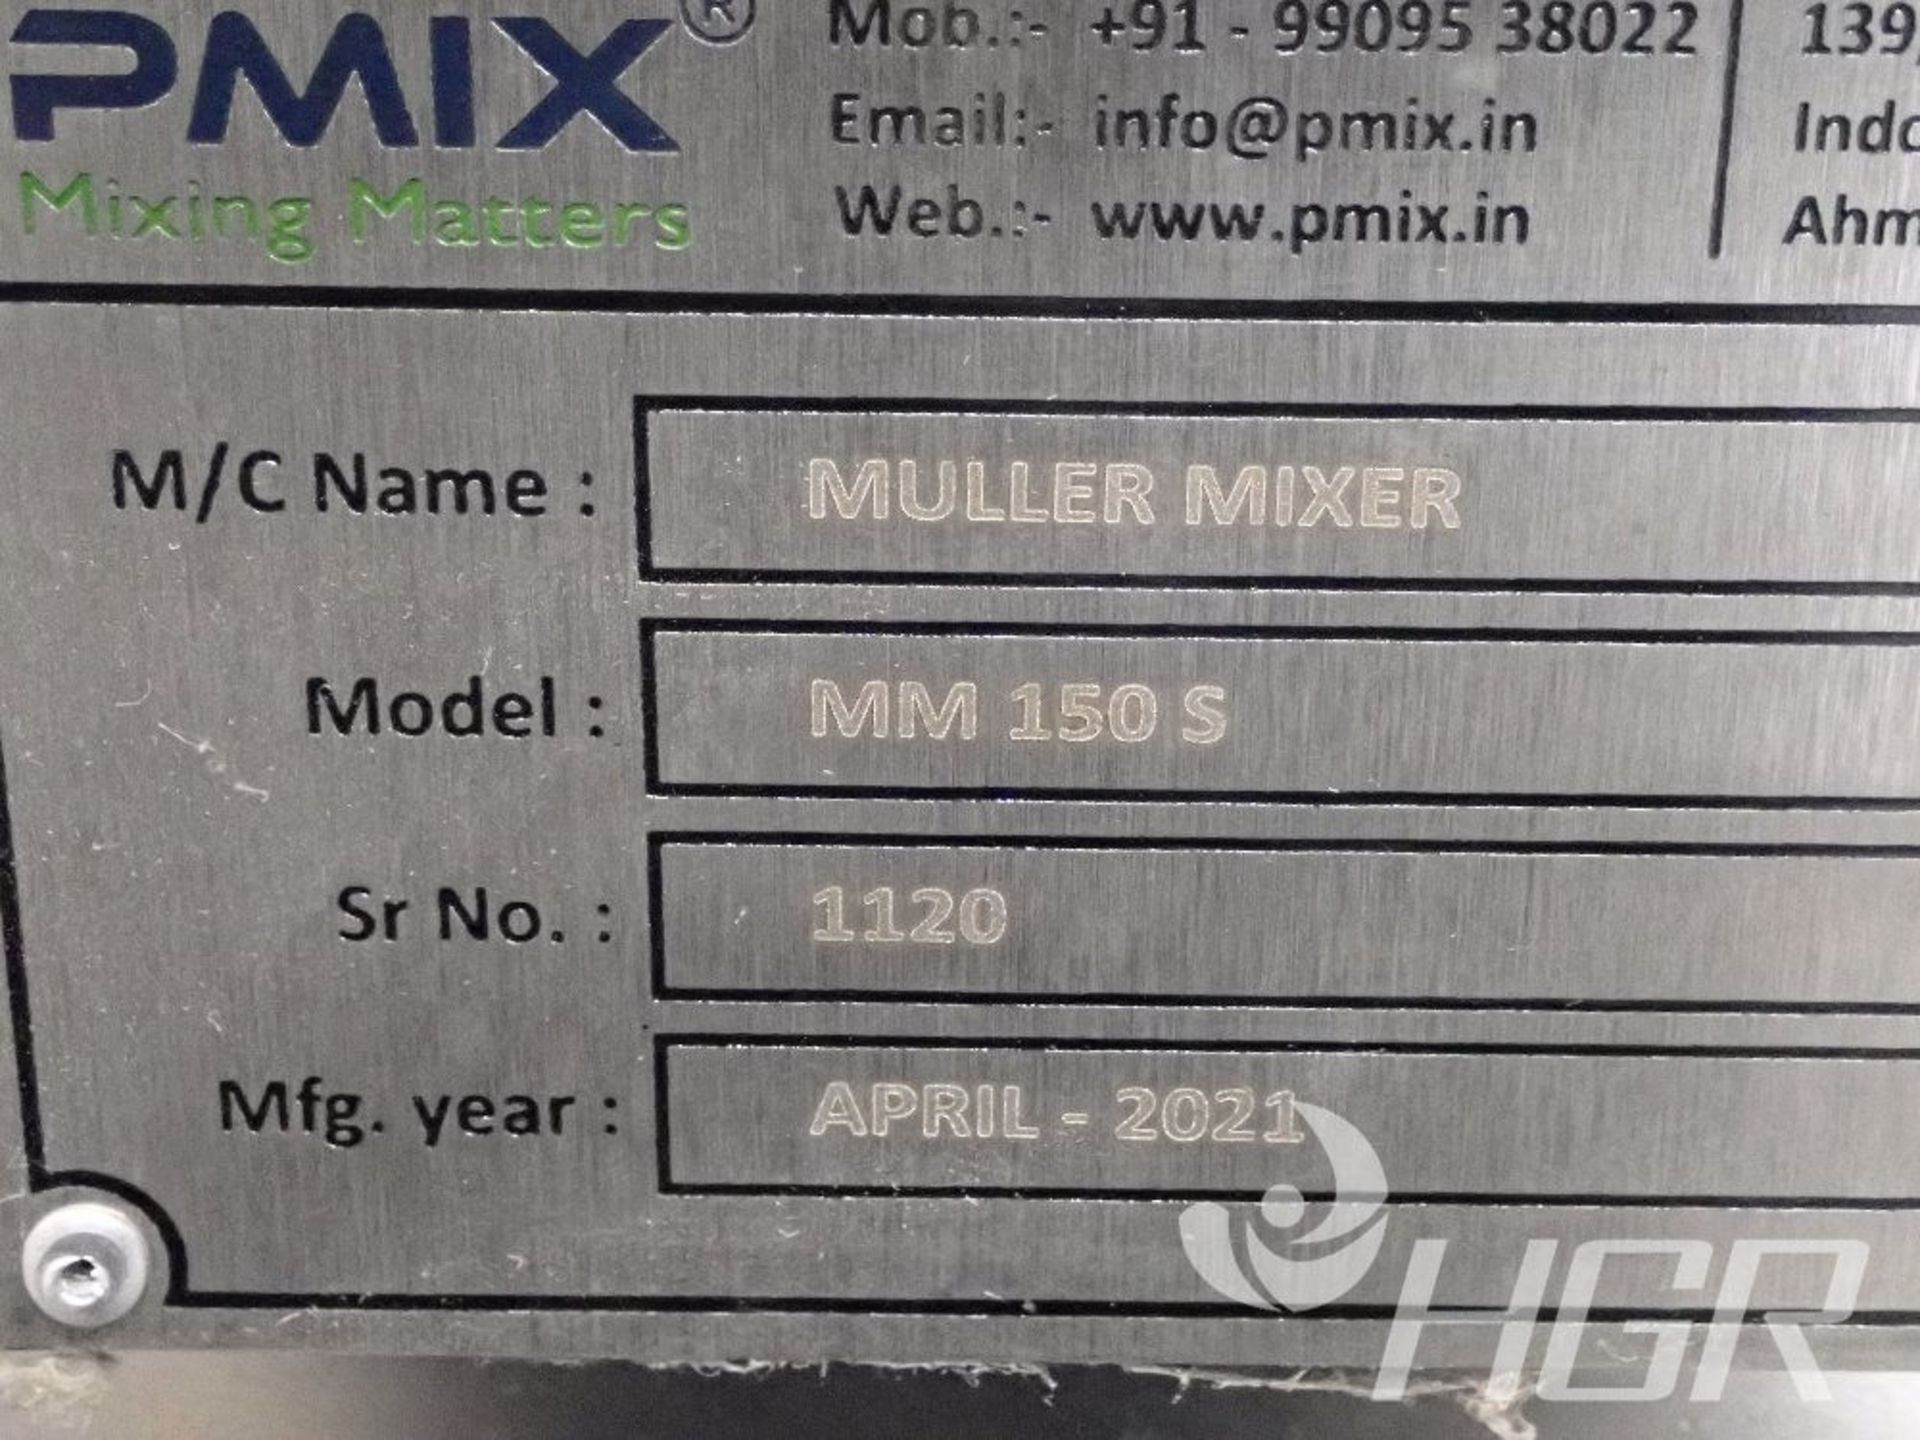 PLEDGE INTERNATIONAL MULLER MIXER, Model MM 150 S, Date: 2021; s/n 1120, Approx. Capacity: 60X60X19, - Image 4 of 18